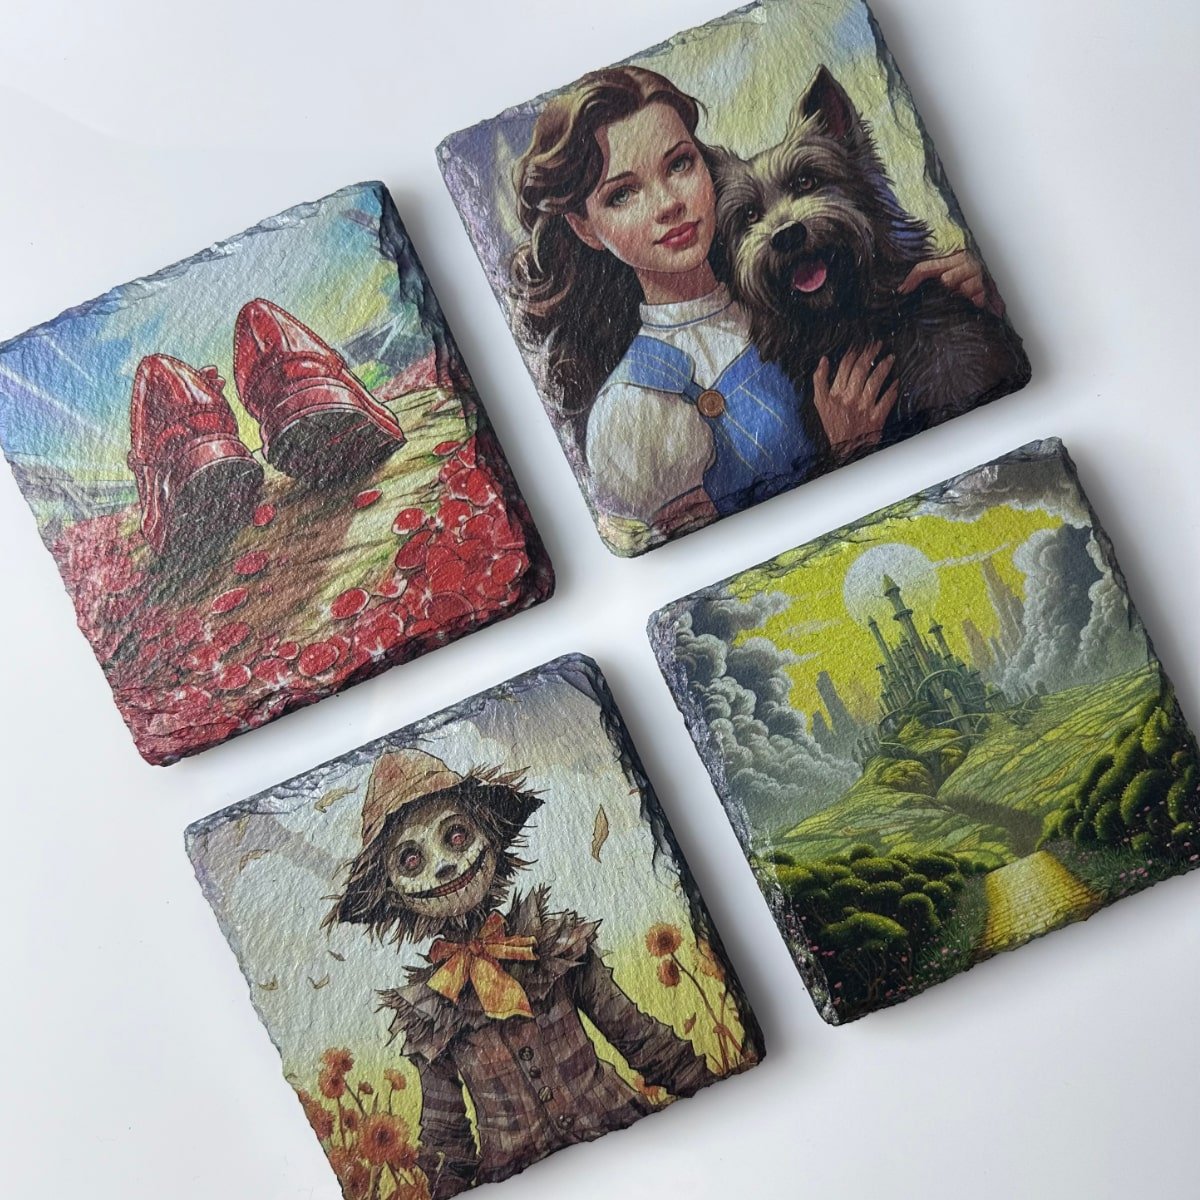 The Wizard of Oz Slate Coasters - Set of 4 - GameOn.games